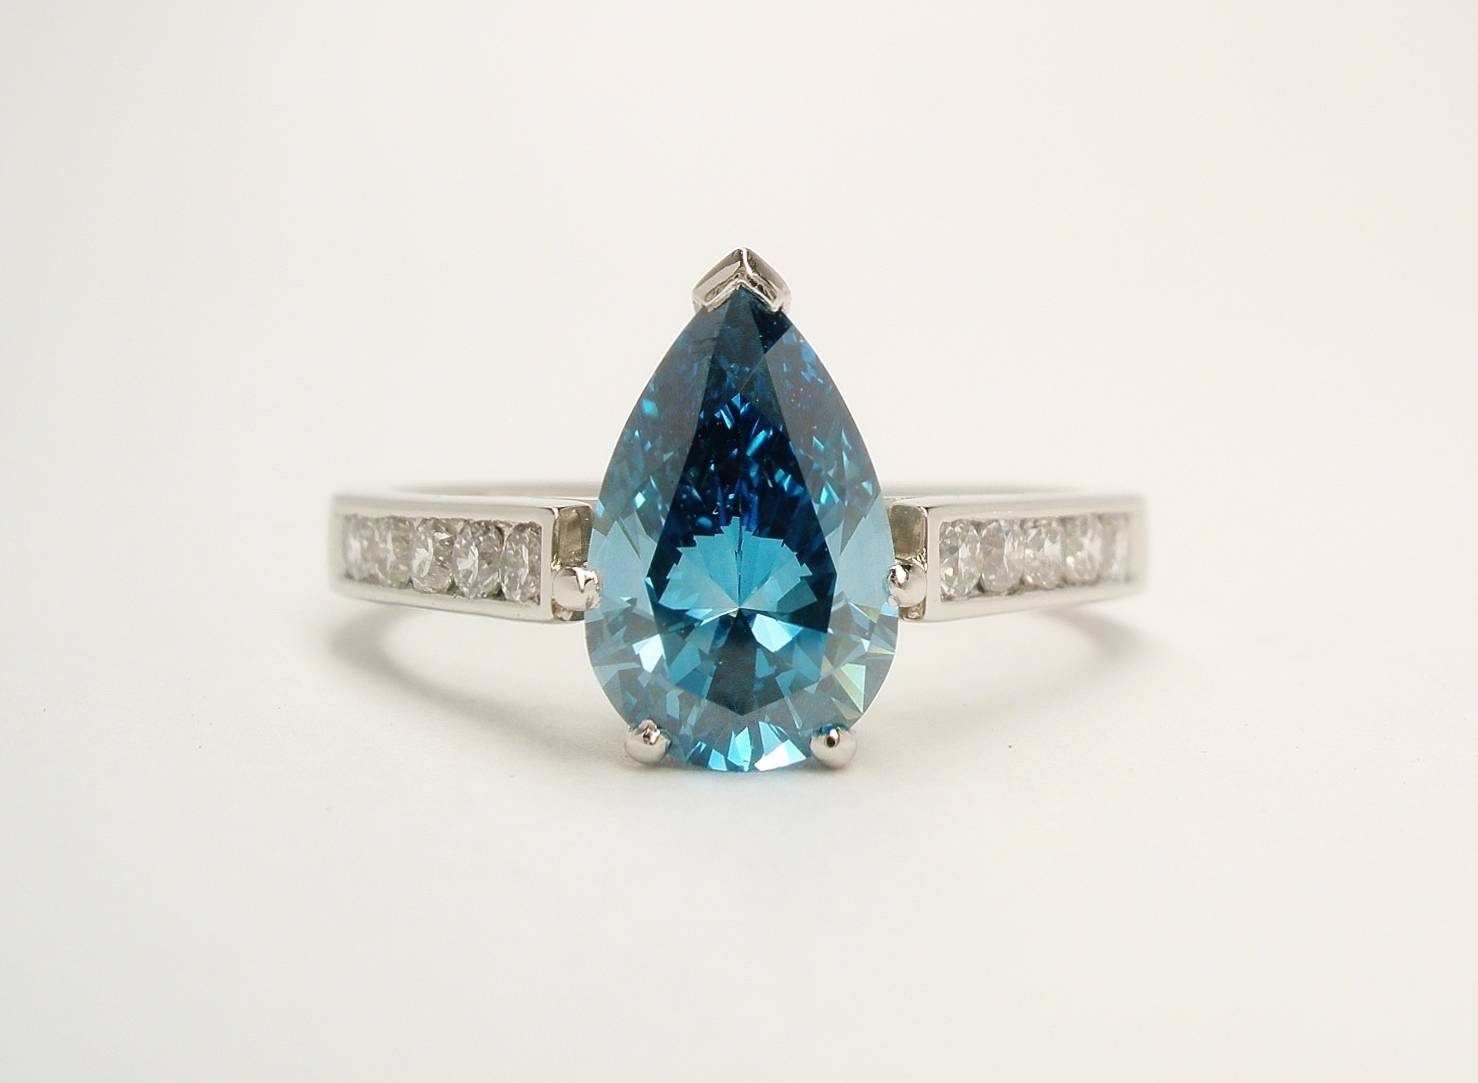 A single stone HTHP treated ocean blue pear shaped diamond ring mounted in platinum with channel set white round brilliant cut diamond shoulders.